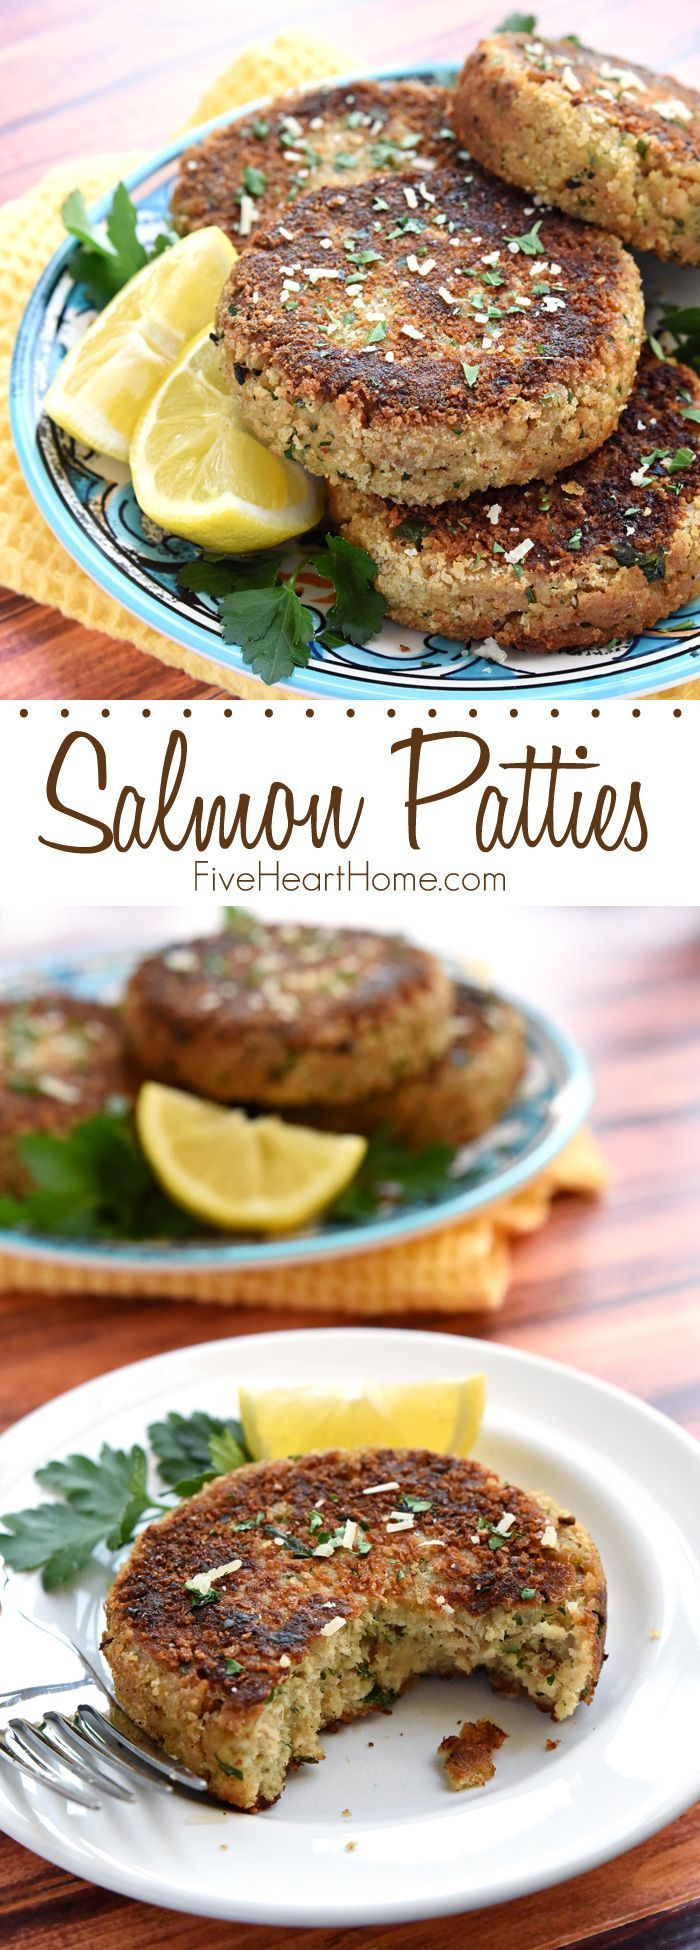 Low Cholesterol Salmon Recipes
 Salmon Patties crunchy on the outside and tender on the